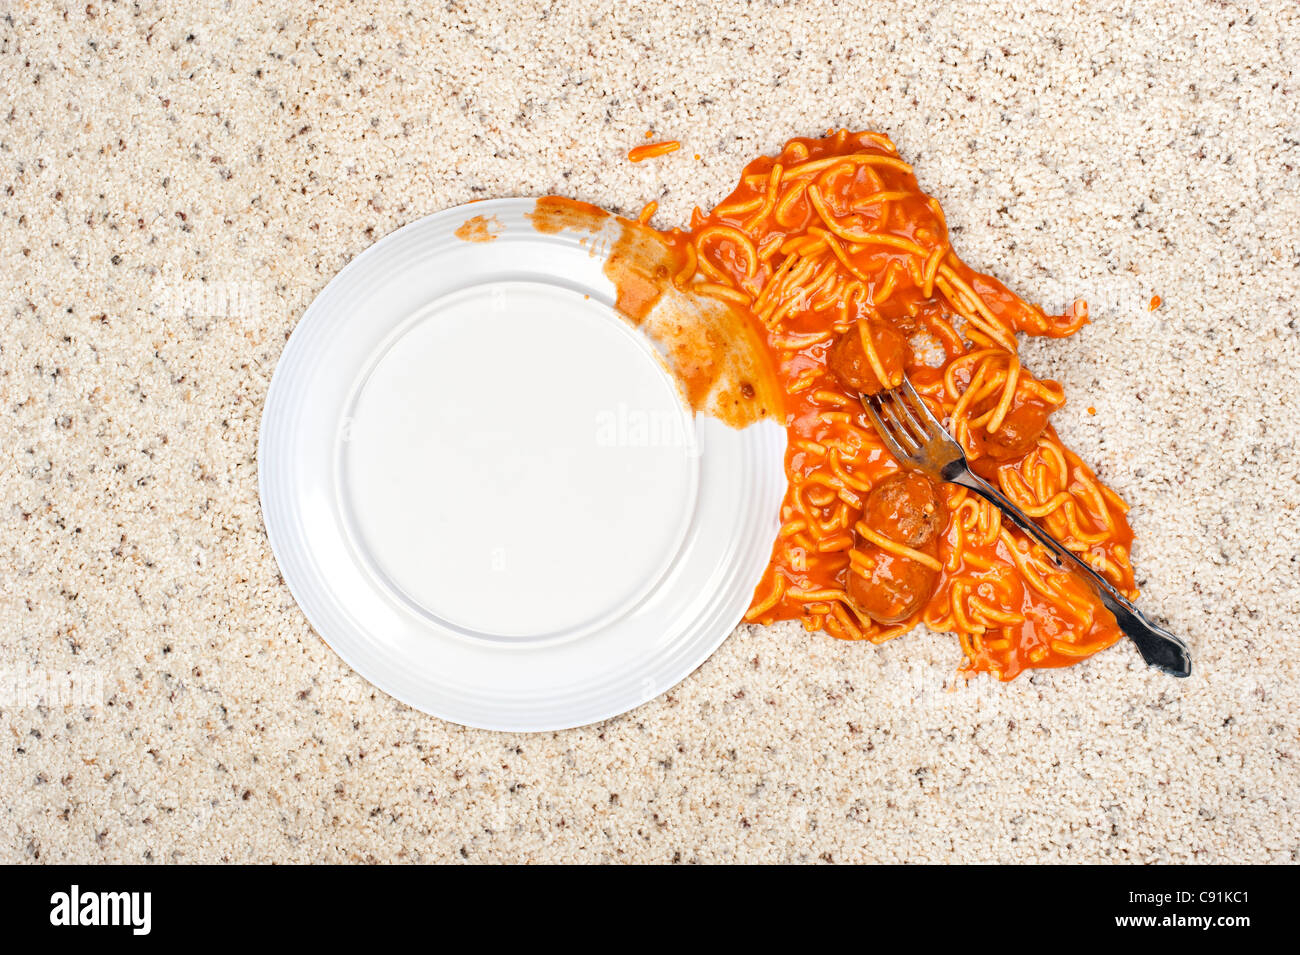 A dropped plate of spaghetti on new carpeting. Stock Photo